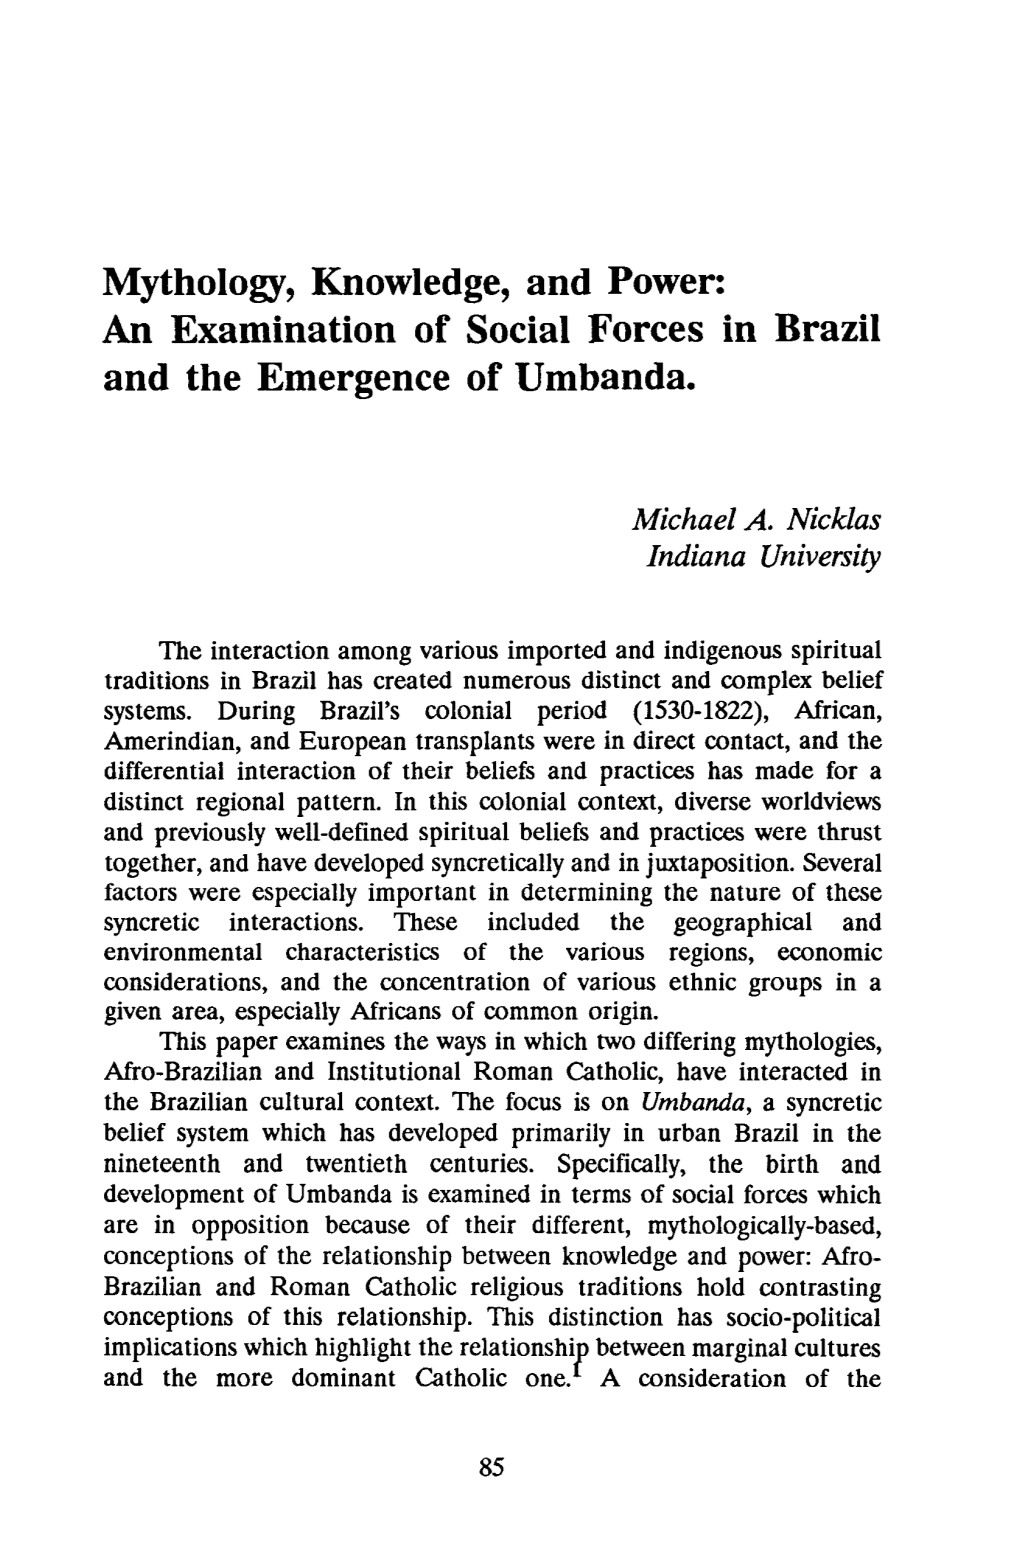 Mythology, Knowledge, and Power: an Examination of Social Forces in Brazil and the Emergence of Umbanda